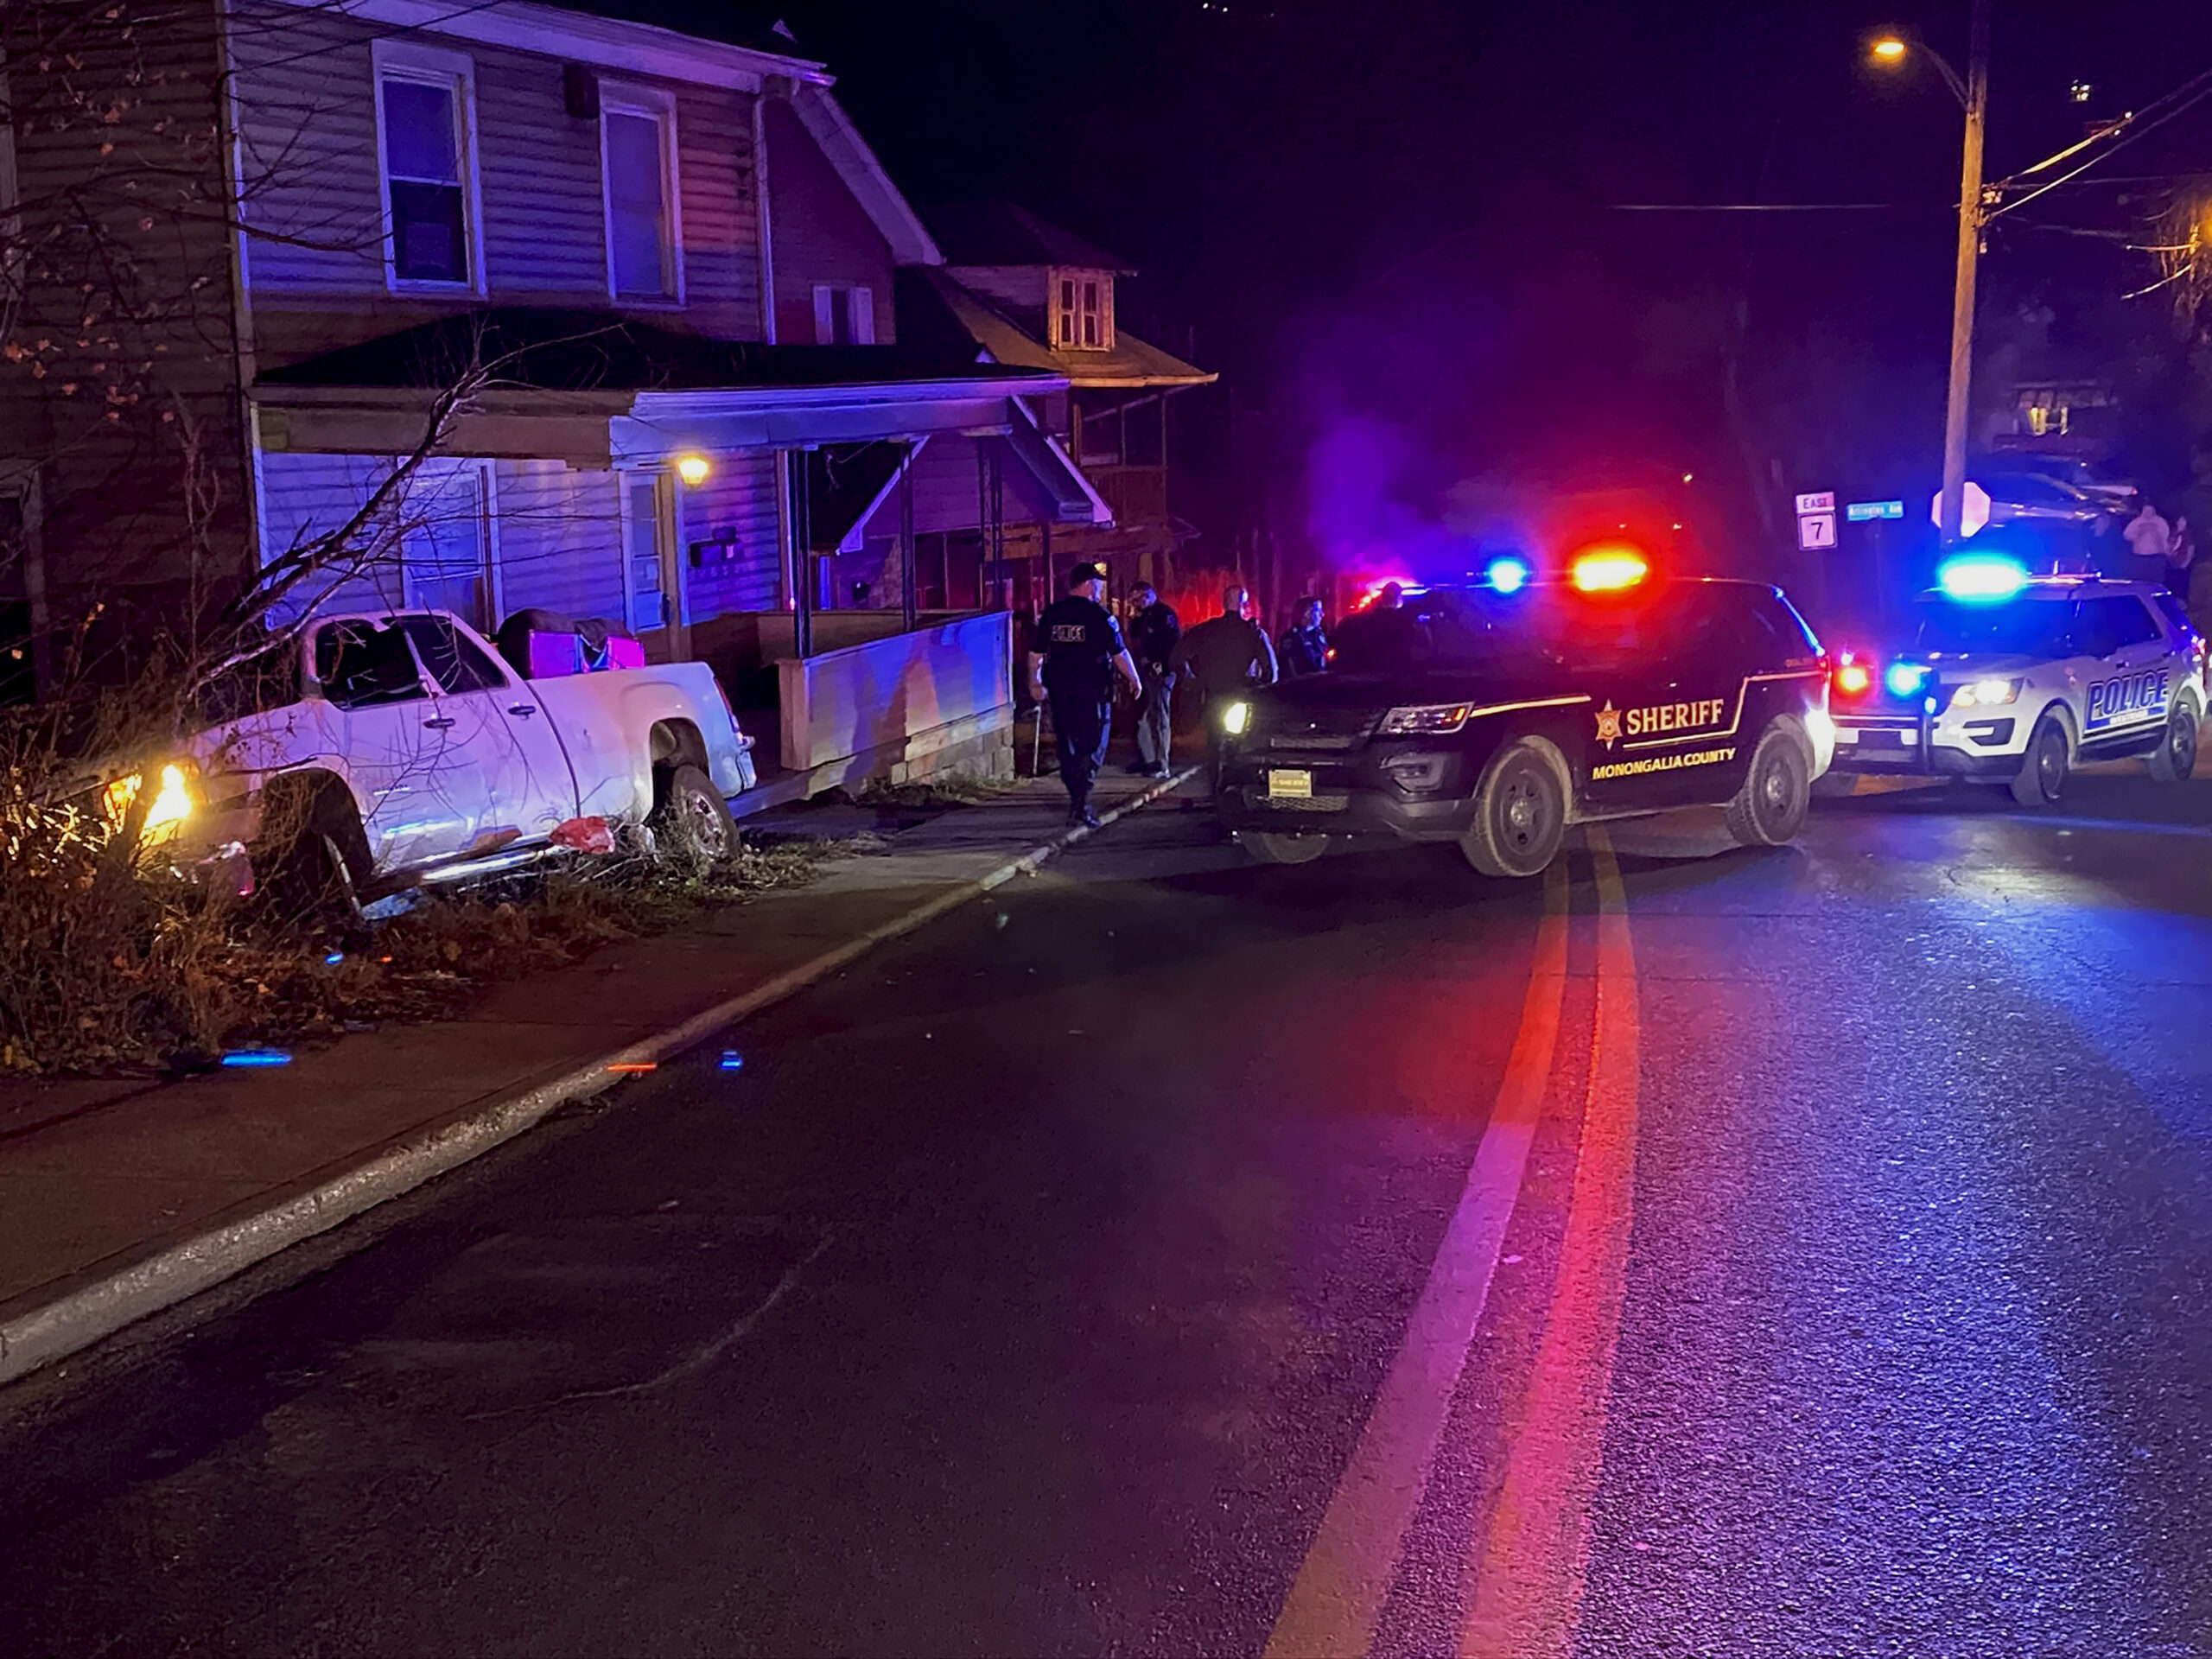 Officers from Westover, Morgantown, Mon County Sheriff's Department and West Virginia State Police were involved in a high speed chase Monday night that started in Westover and ended with a wreck on Brockway Avenue. A white pickup truck involved in a chase rests against a porch it struck after it wrecked on Brockway Avenue Monday night. According to scanner traffic, the truck was stolen out of Florida.